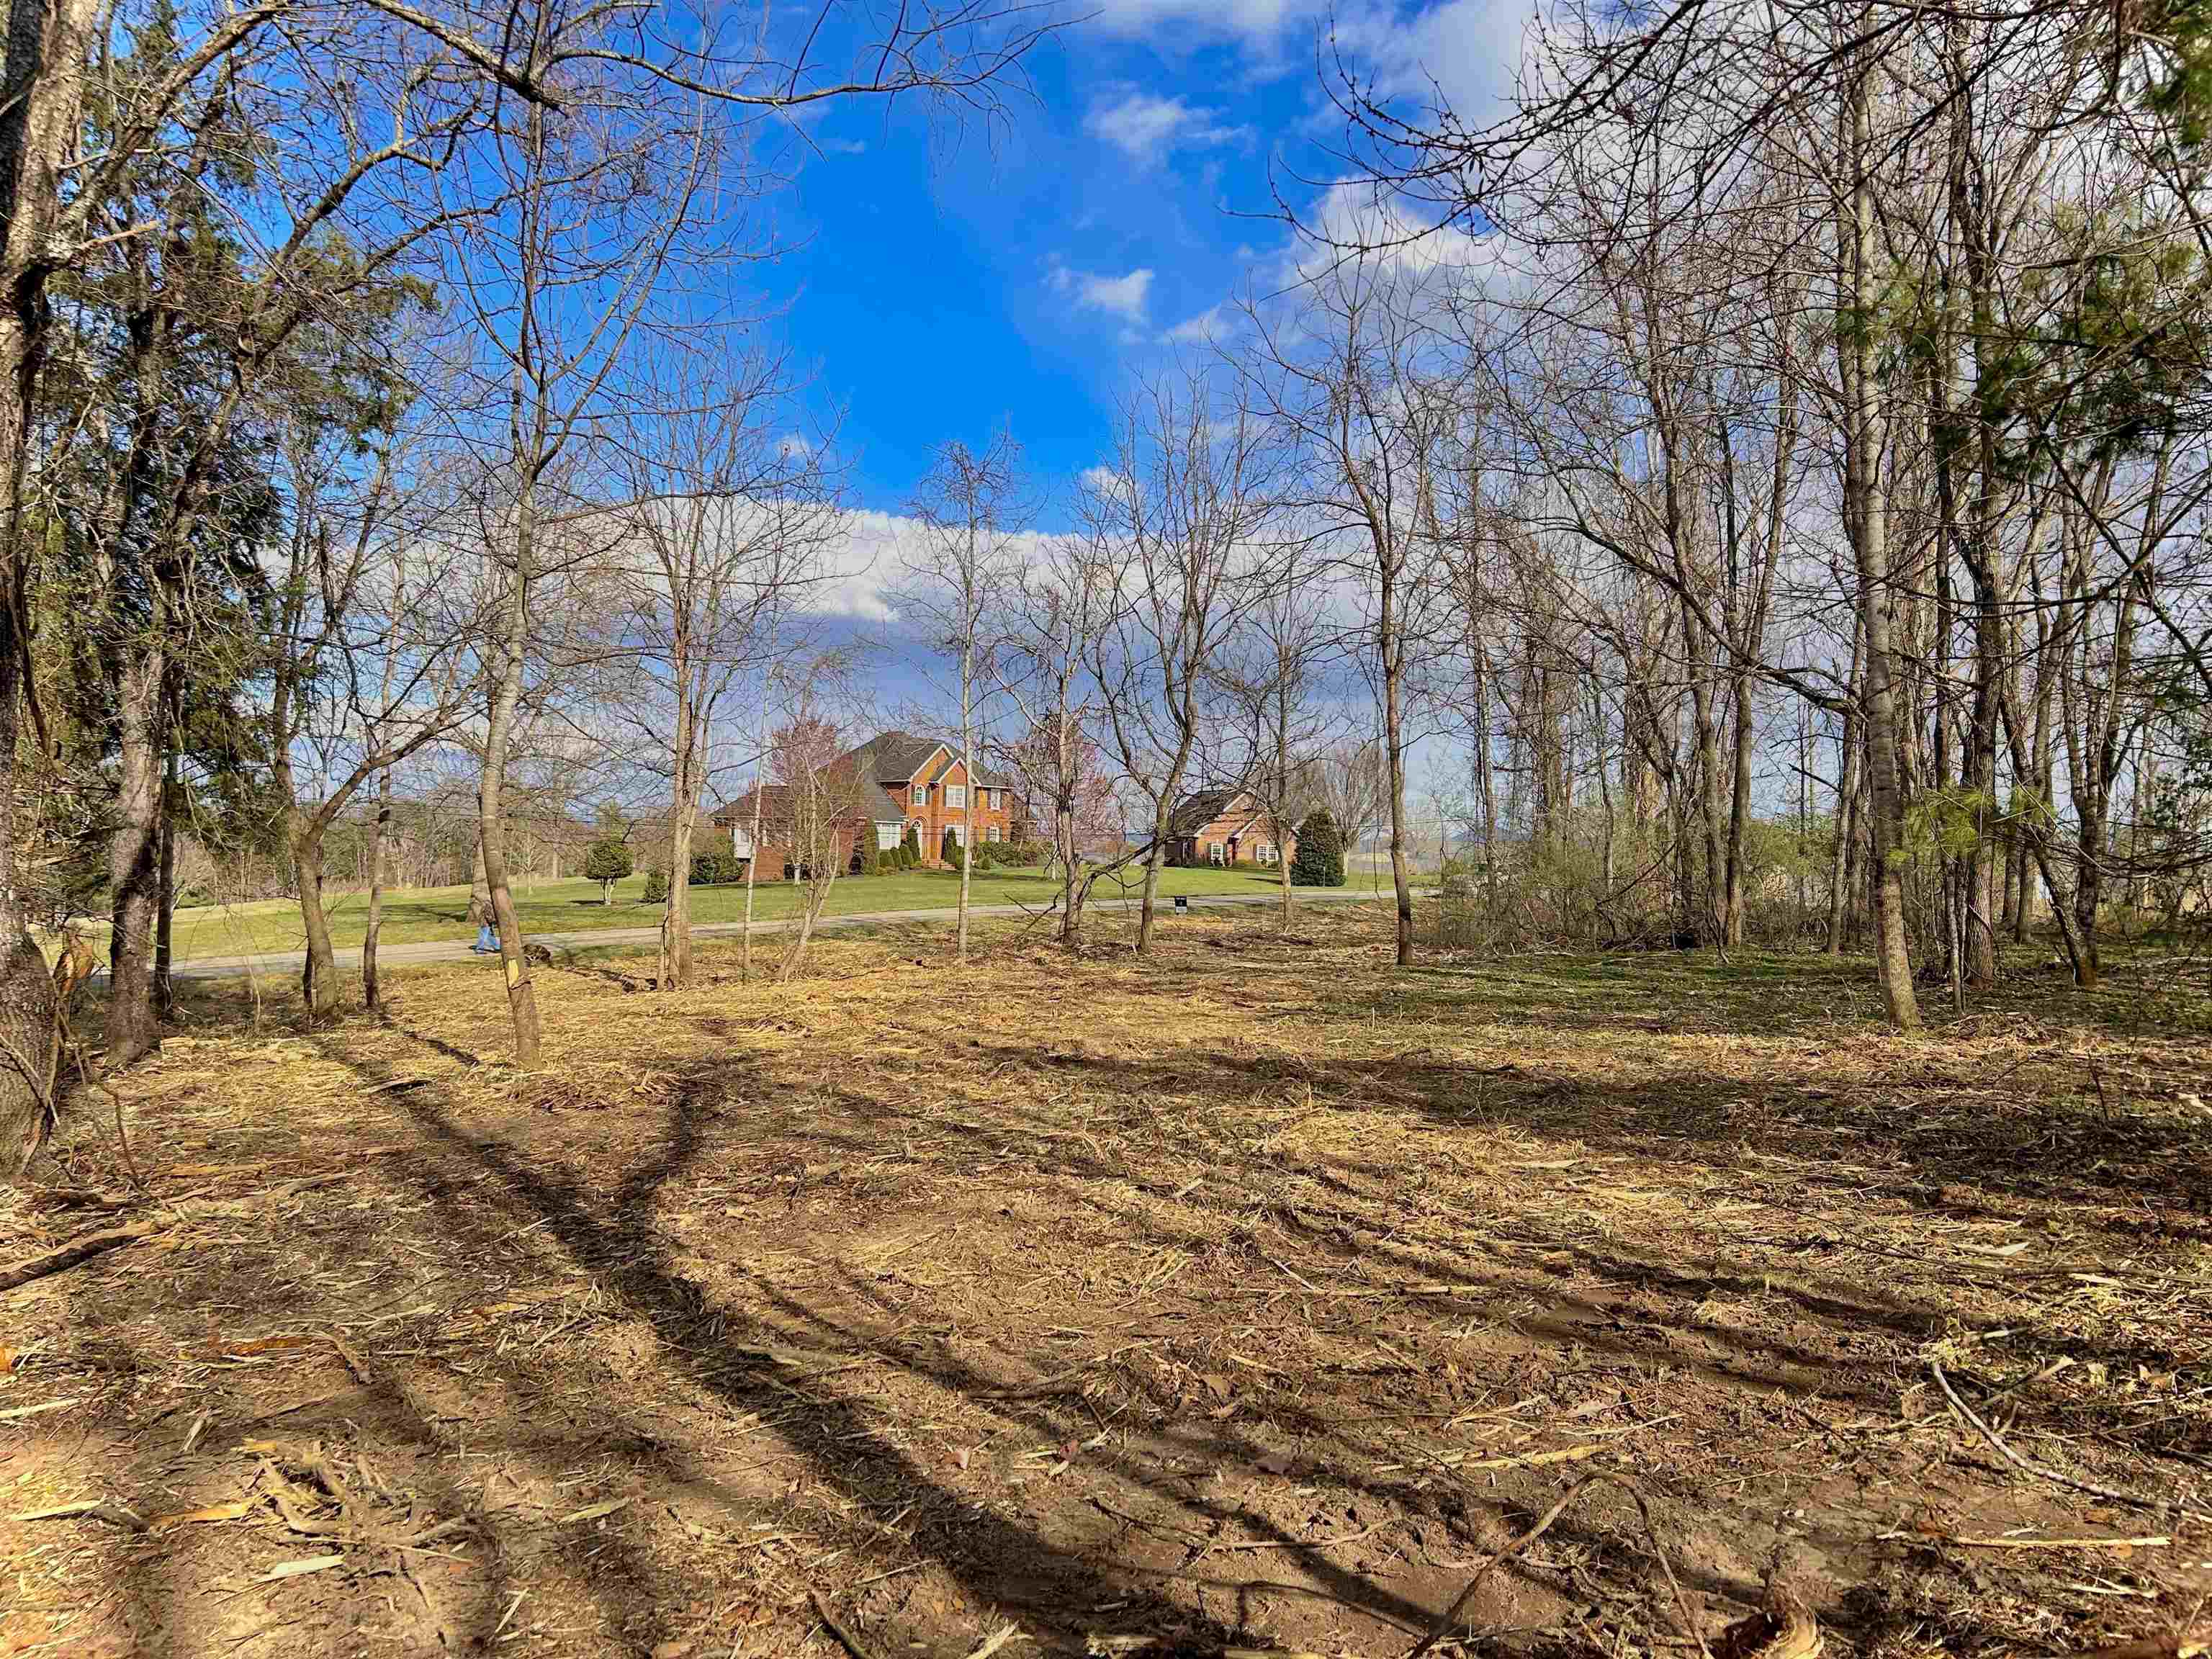 Welcome to Claytor Village. This well-laying and private 1-acre lot offers beautiful views and includes private community lake access. This property is conveniently located only 5 minutes off of Interstate 81 (exit 101) and 1 mile from Claytor Lake State Park. Come enjoy all this property has to offer including year-round recreation, relaxation, nearby water access, boat launch, and incredibly close proximity to Claytor Lake State Park hiking trails, picnic areas, swimming beaches, camping, and so much more! Having already been recently perced for a 3 bedroom (possibly up to 4 bedroom) home on a traditional septic system, come with your dreams and plans to build your dream home on this amazing property. Don't wait, schedule your visit today!